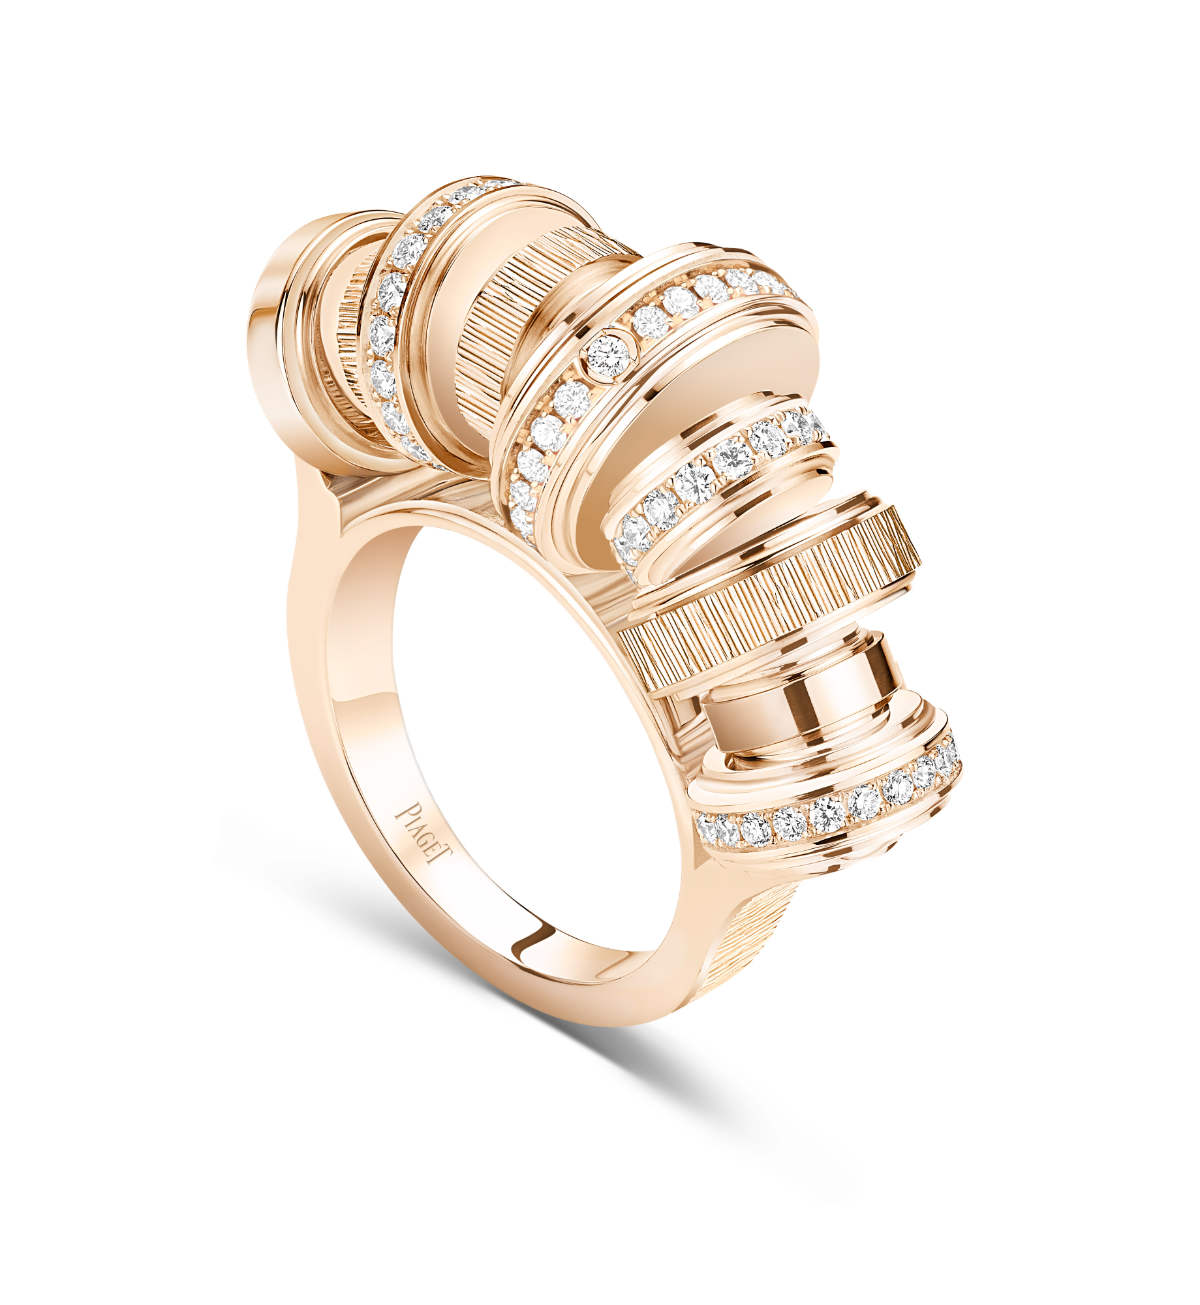 Piaget Introduces Its New Possession Creative Ring